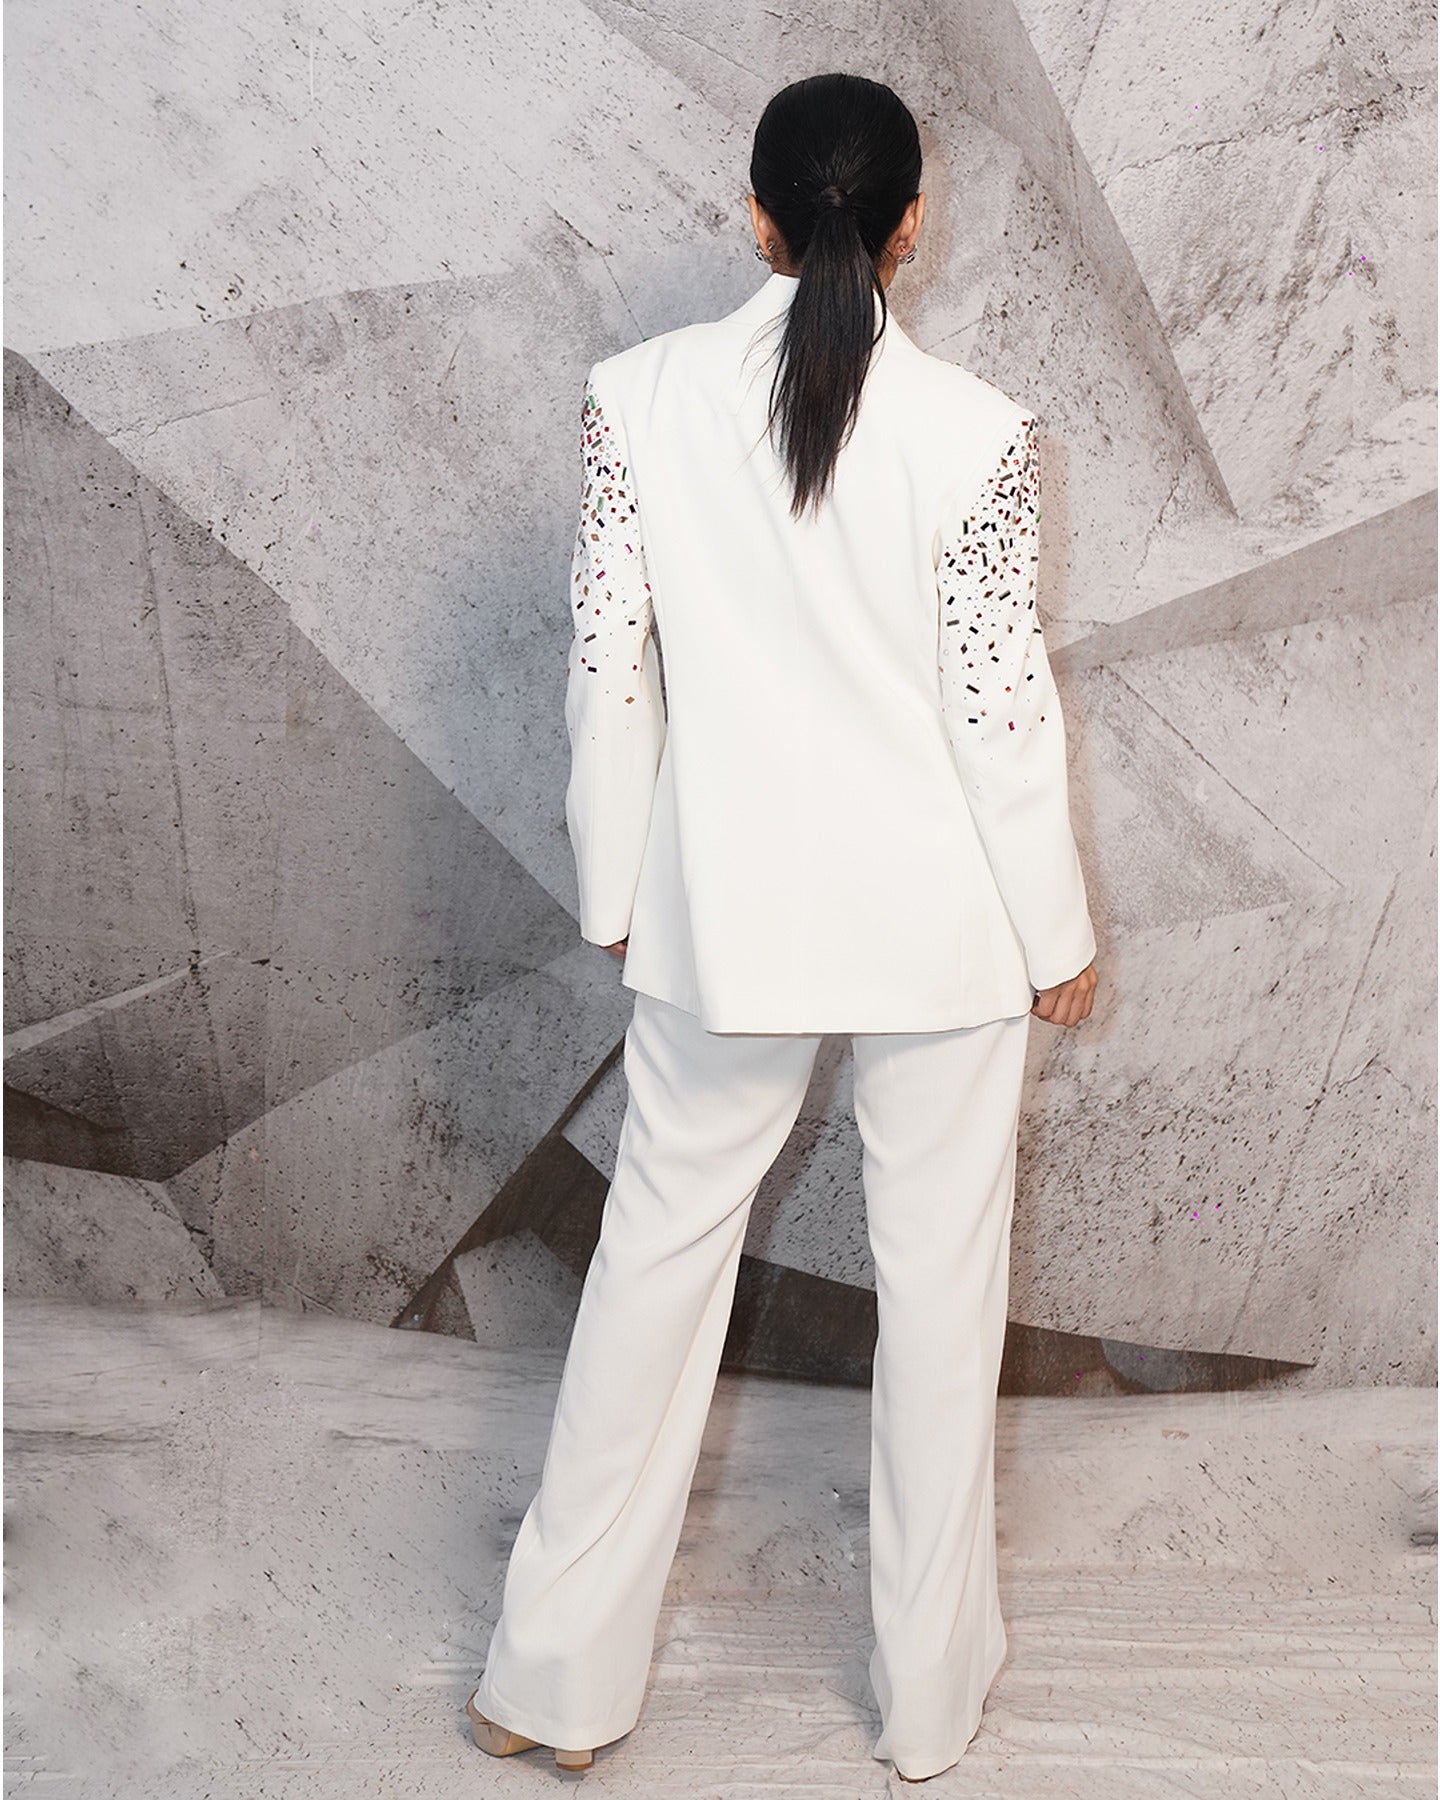 Draped in the pristine elegance of white, this blazer suit exudes timeless sophistication. 